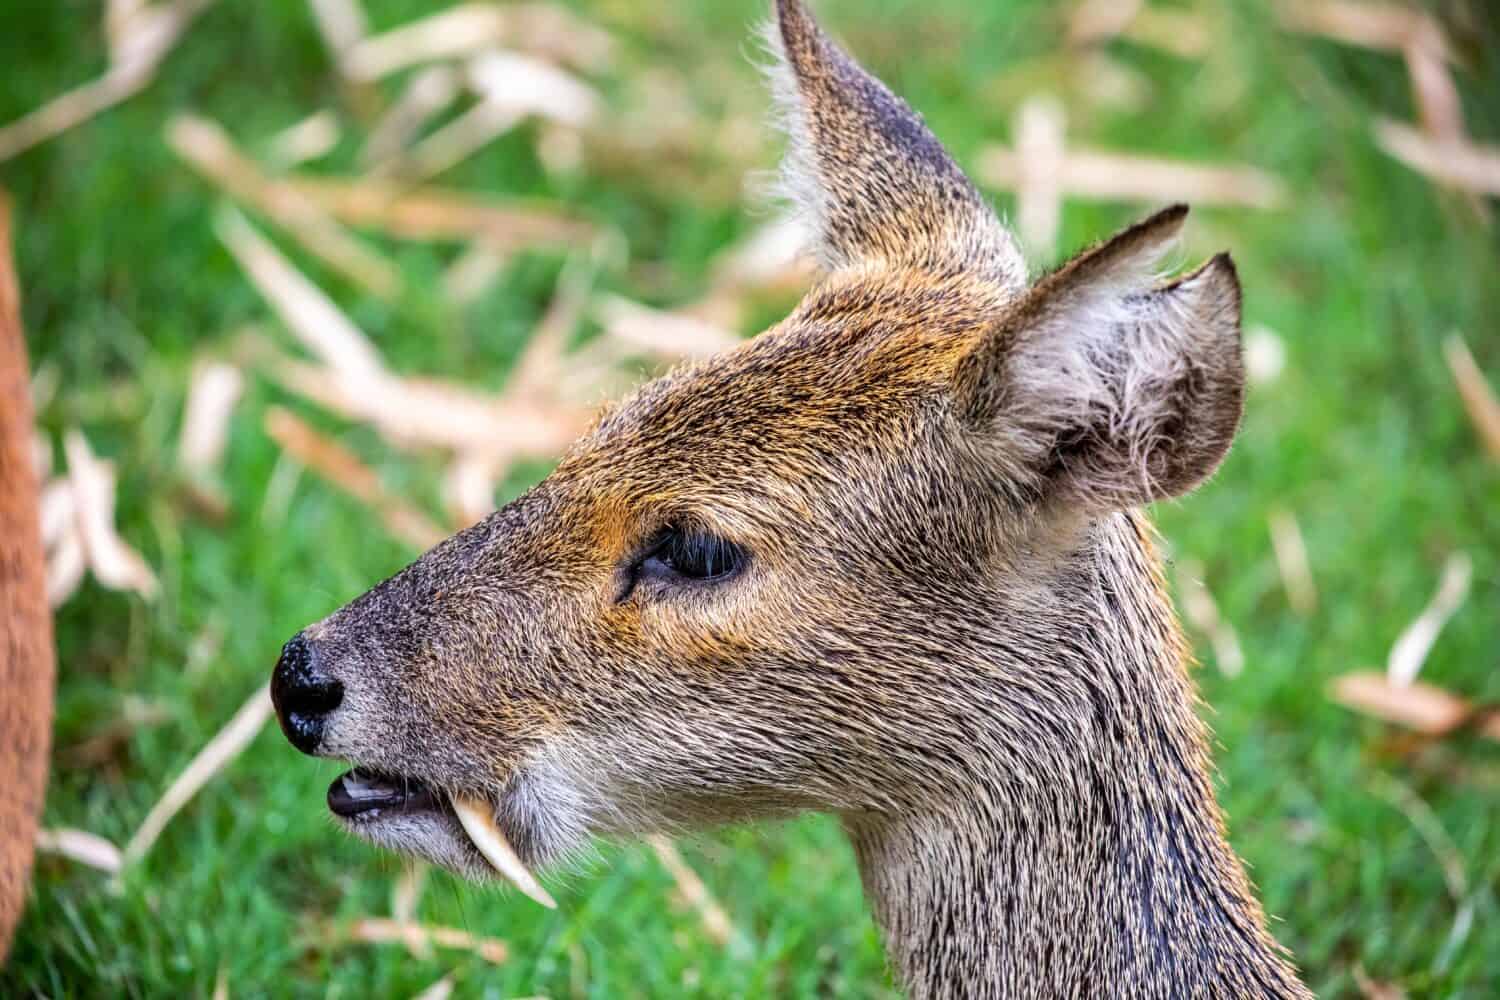 The water deer (Hydropotes inermis) is a small deer species native to China and Korea. Its prominent tusks.